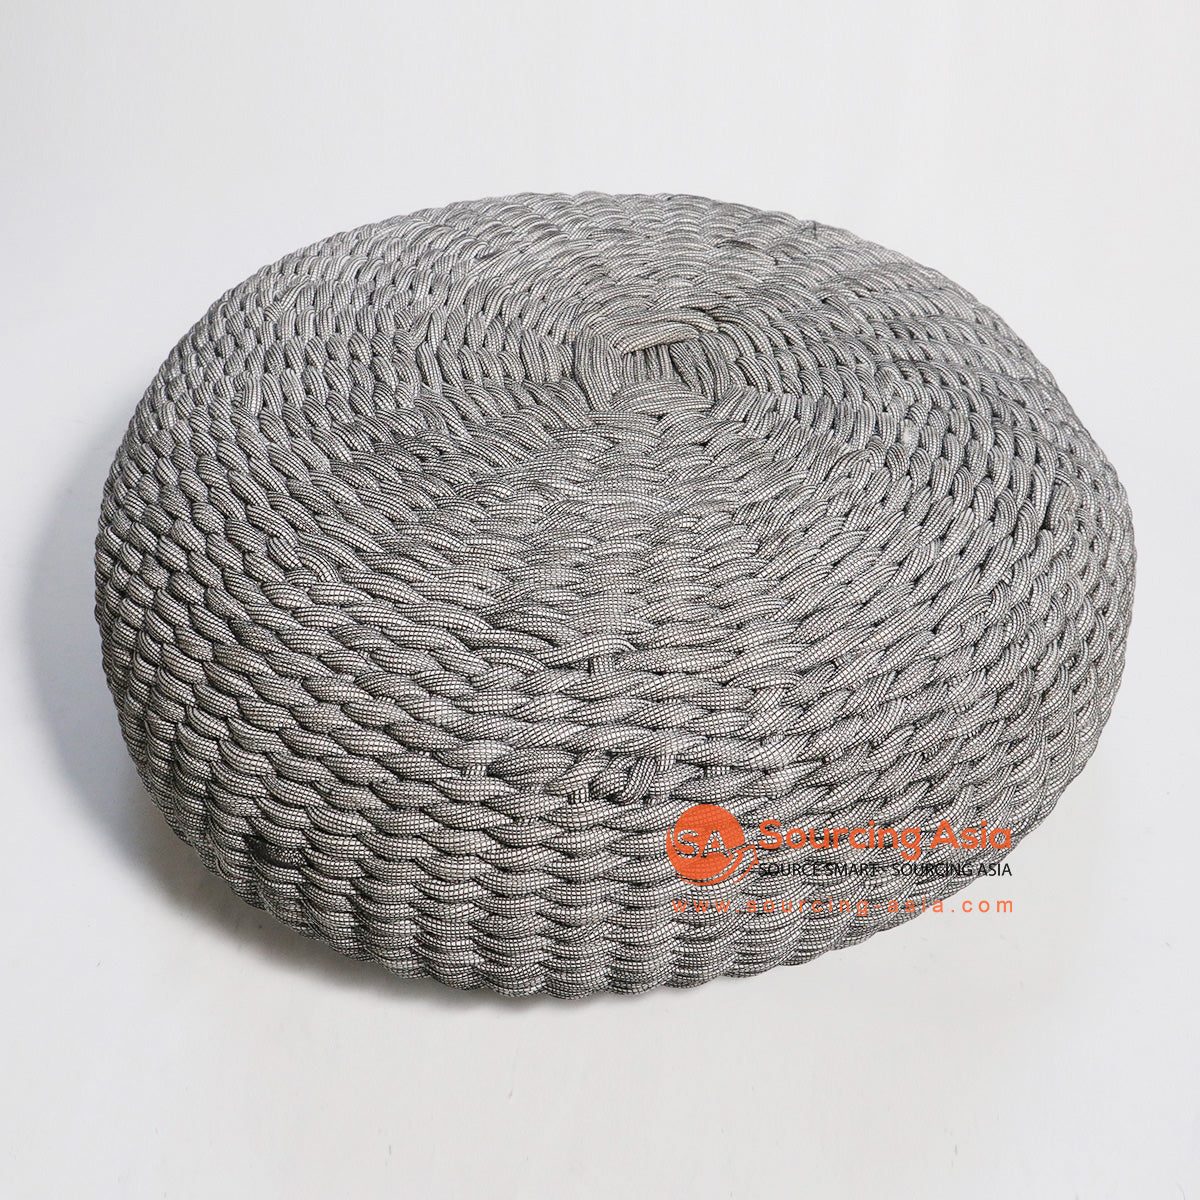 HBSC144 GREY RECYCLED FABRIC FOOT POUFFE